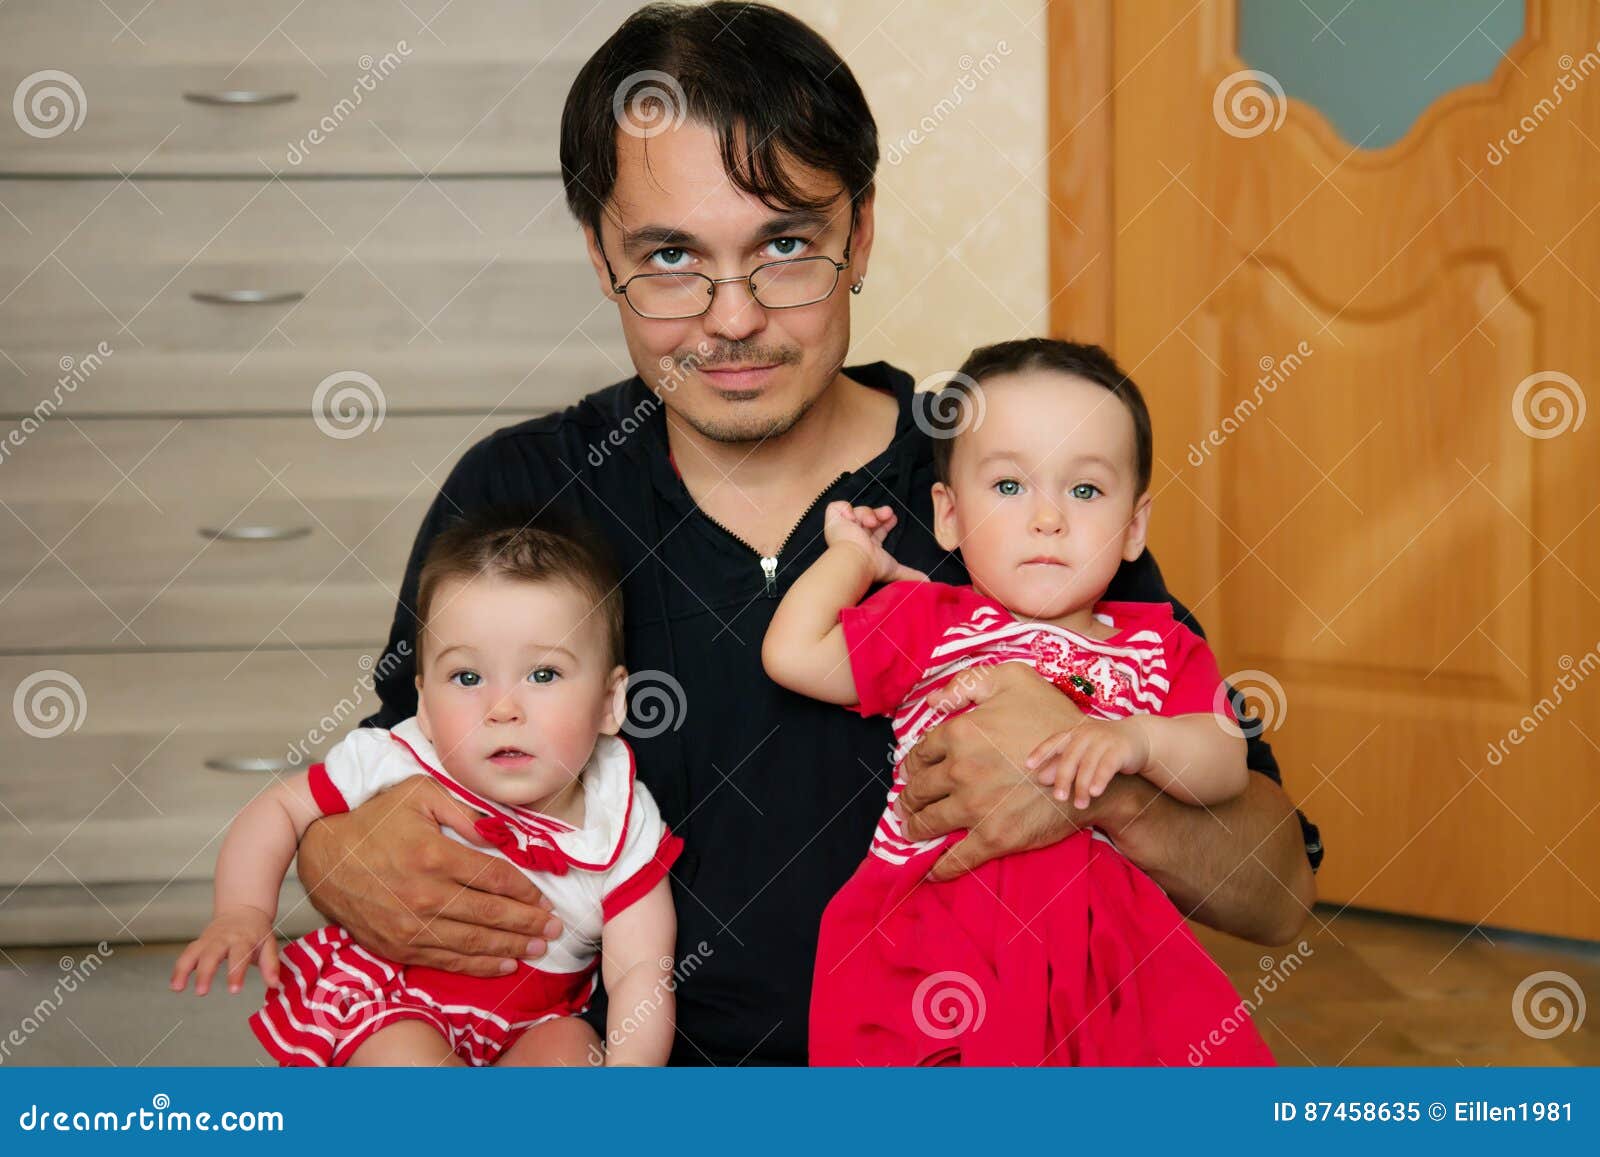 Young Dad Hugging His Twin Girls Stock Image Image Of Male Baby